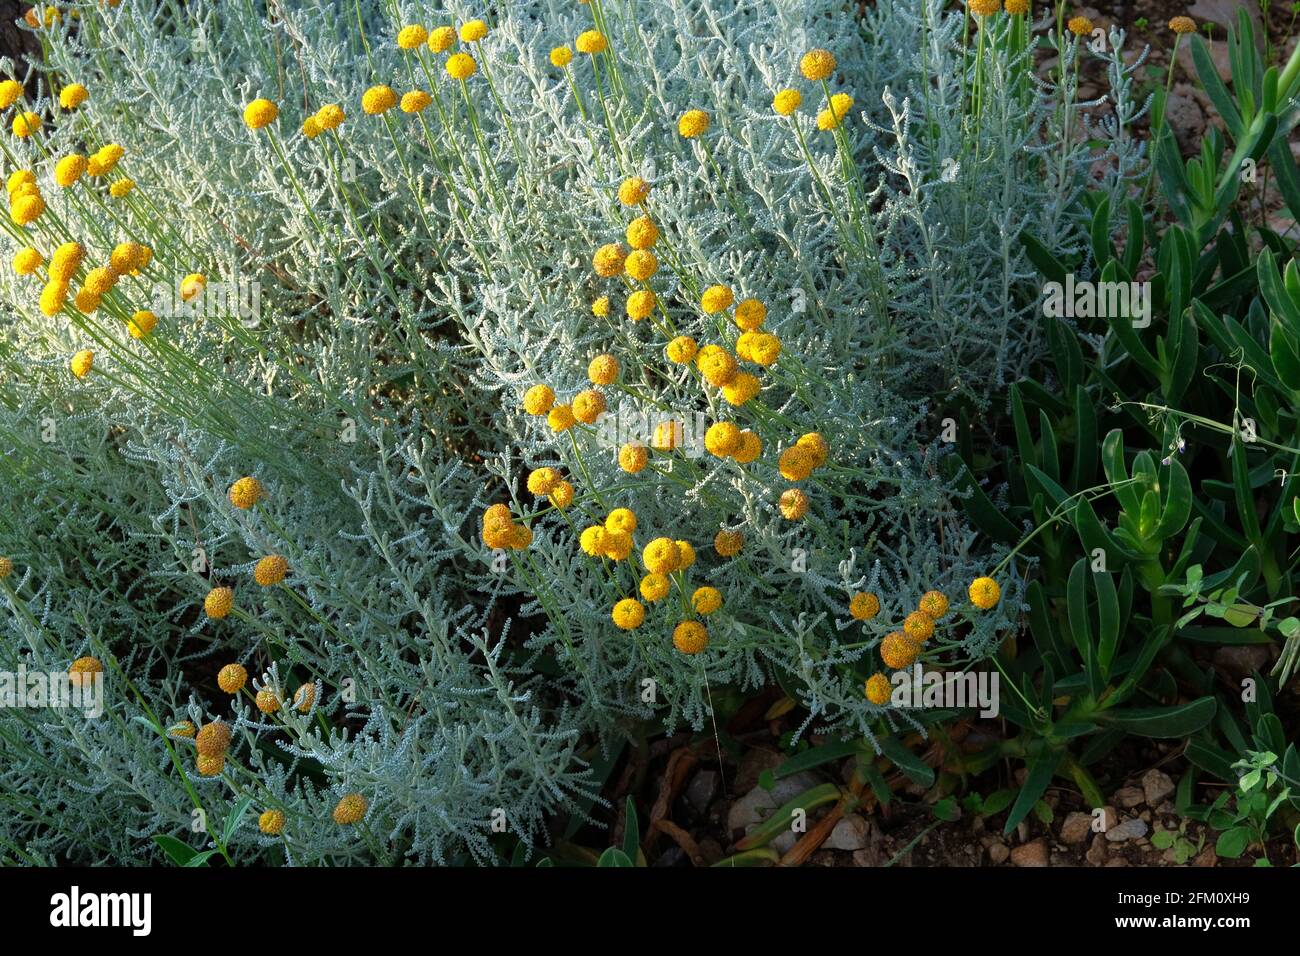 Yellow flowers for herbalism. Medicinal herb. Helichrysum flowers on green nature background. Stock Photo